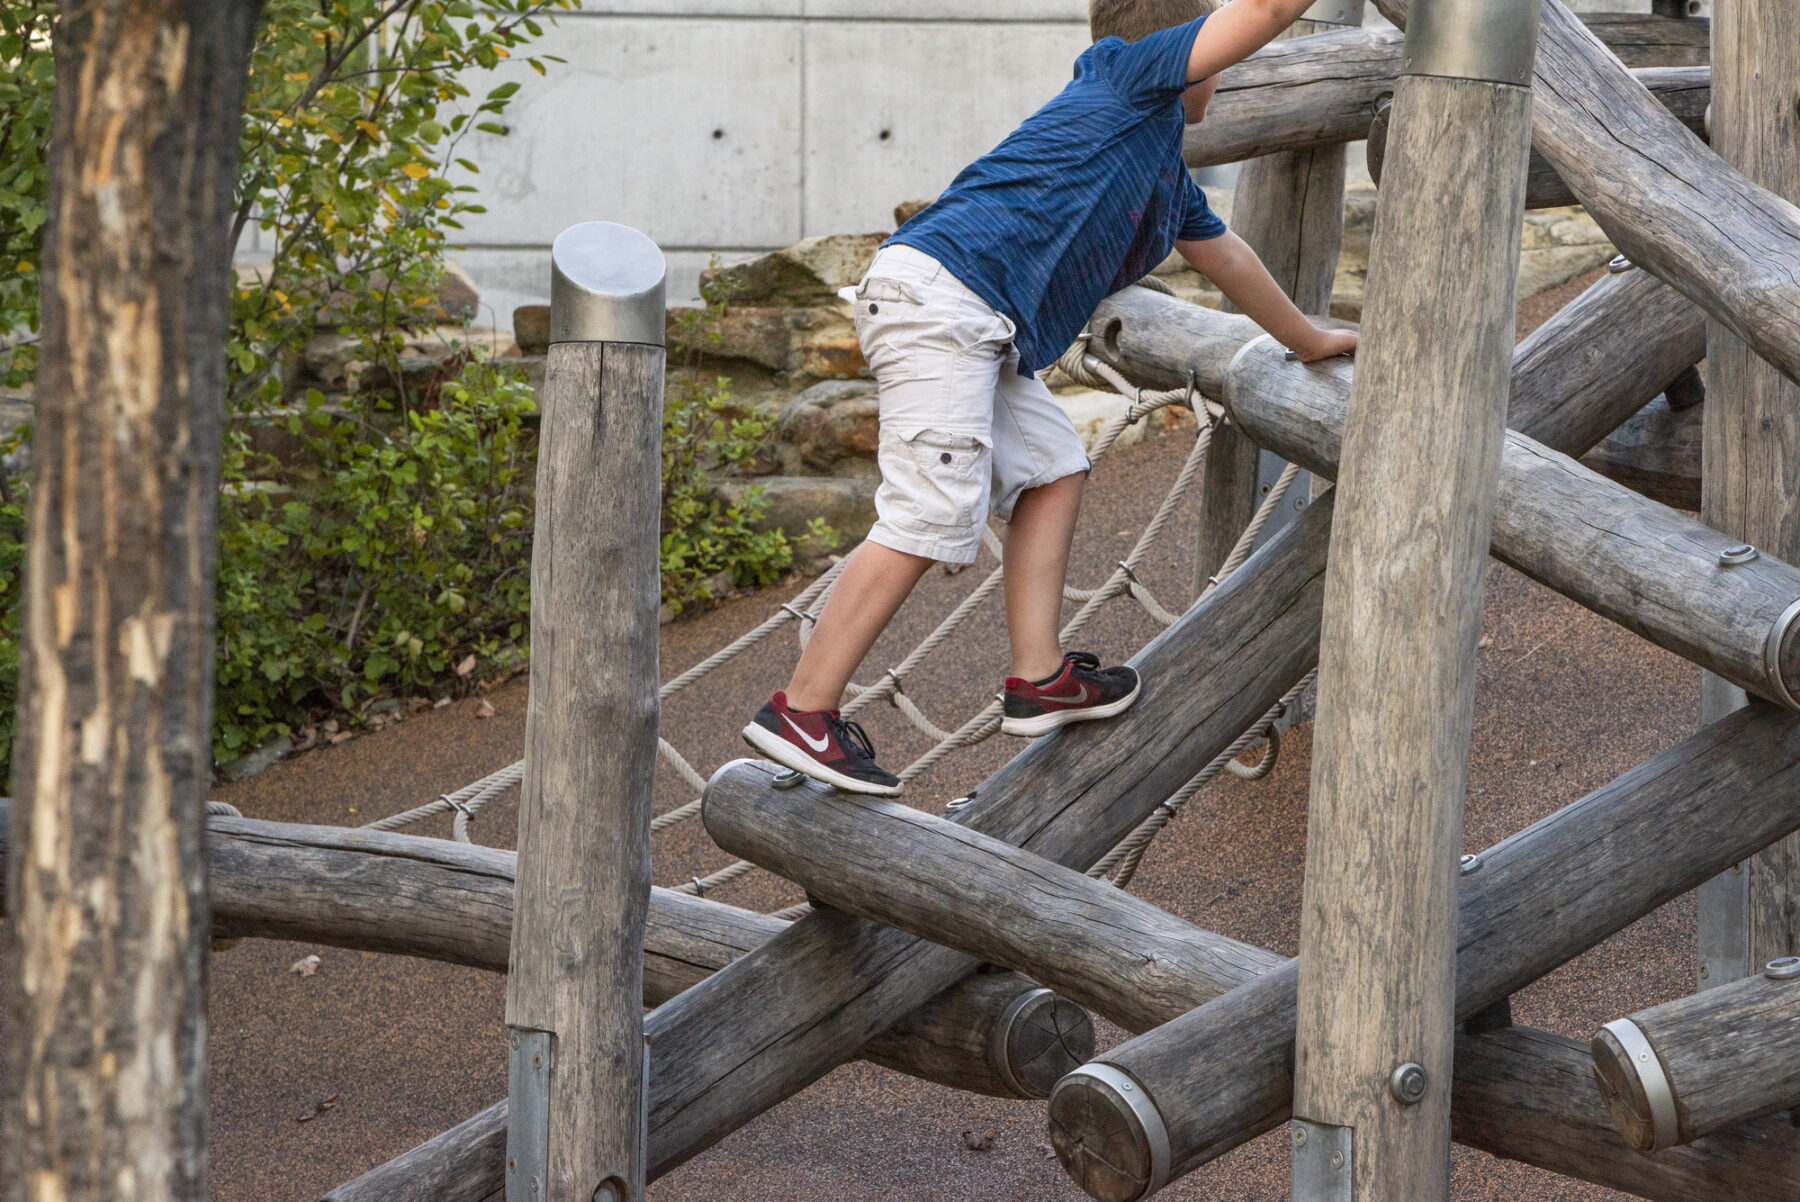 A child balances on a wooden play structure